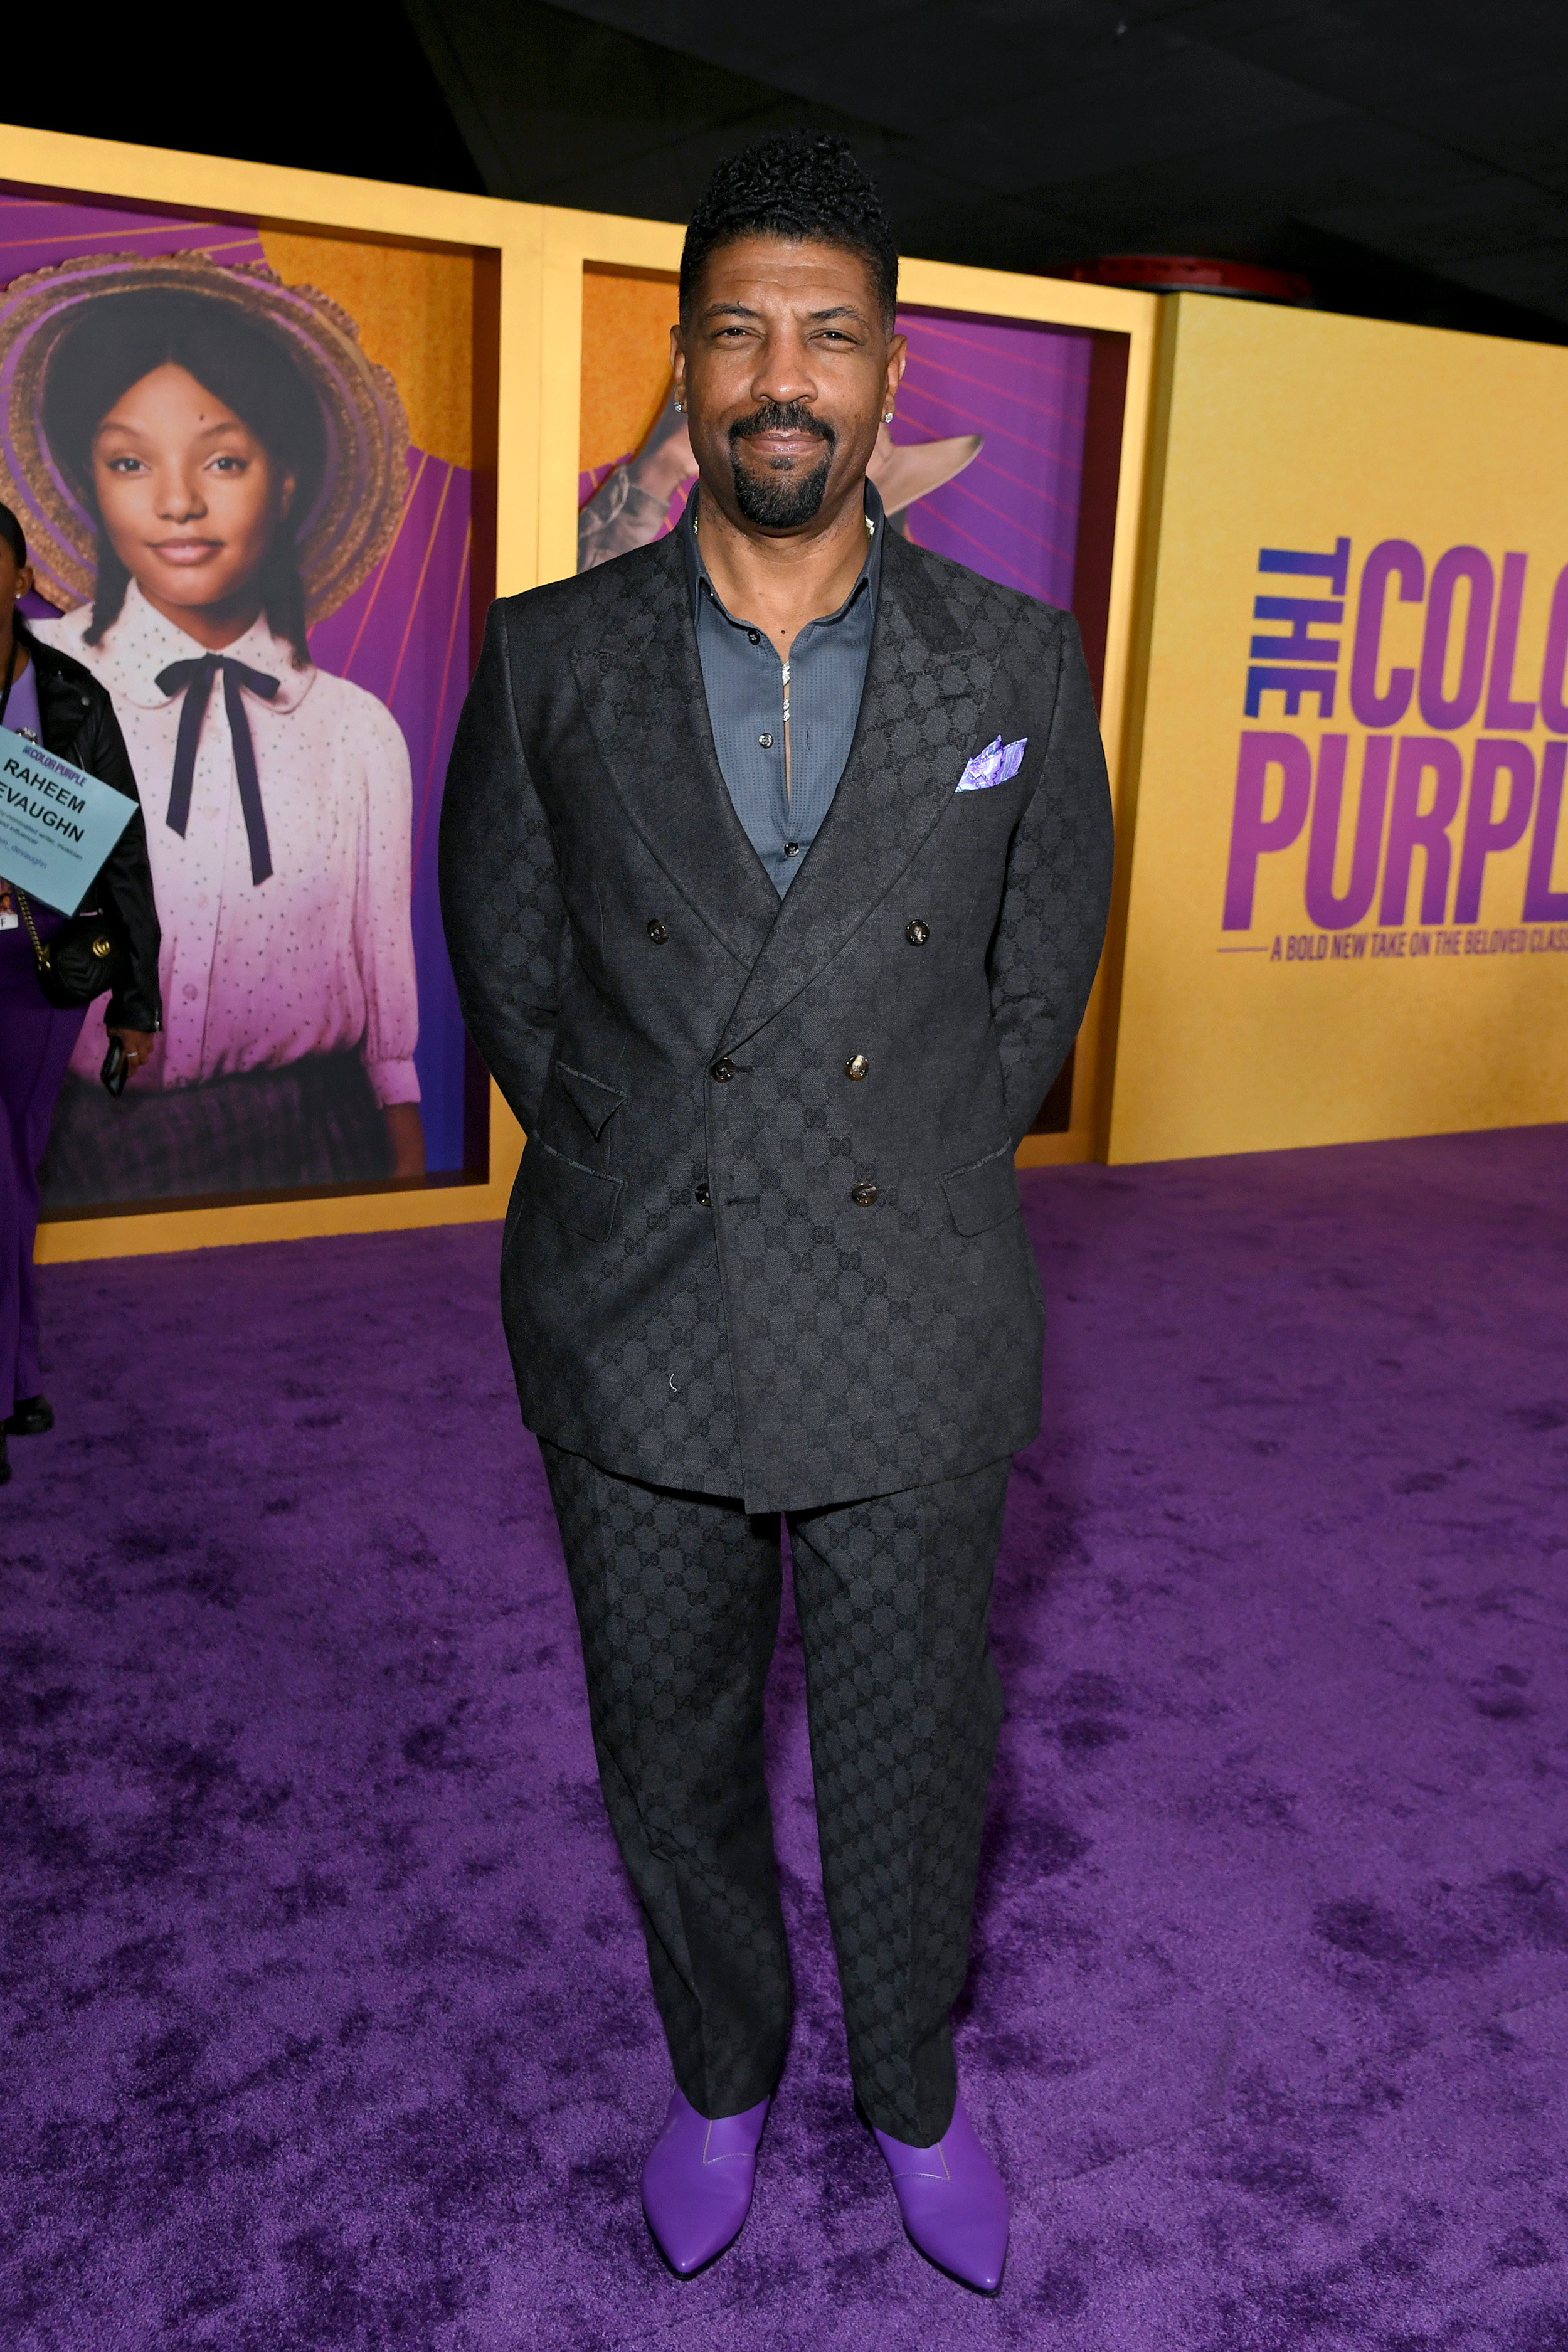 Deon in a black suit, no tie, with purple shoes and a purple handkerchief in the suit jacket pocket